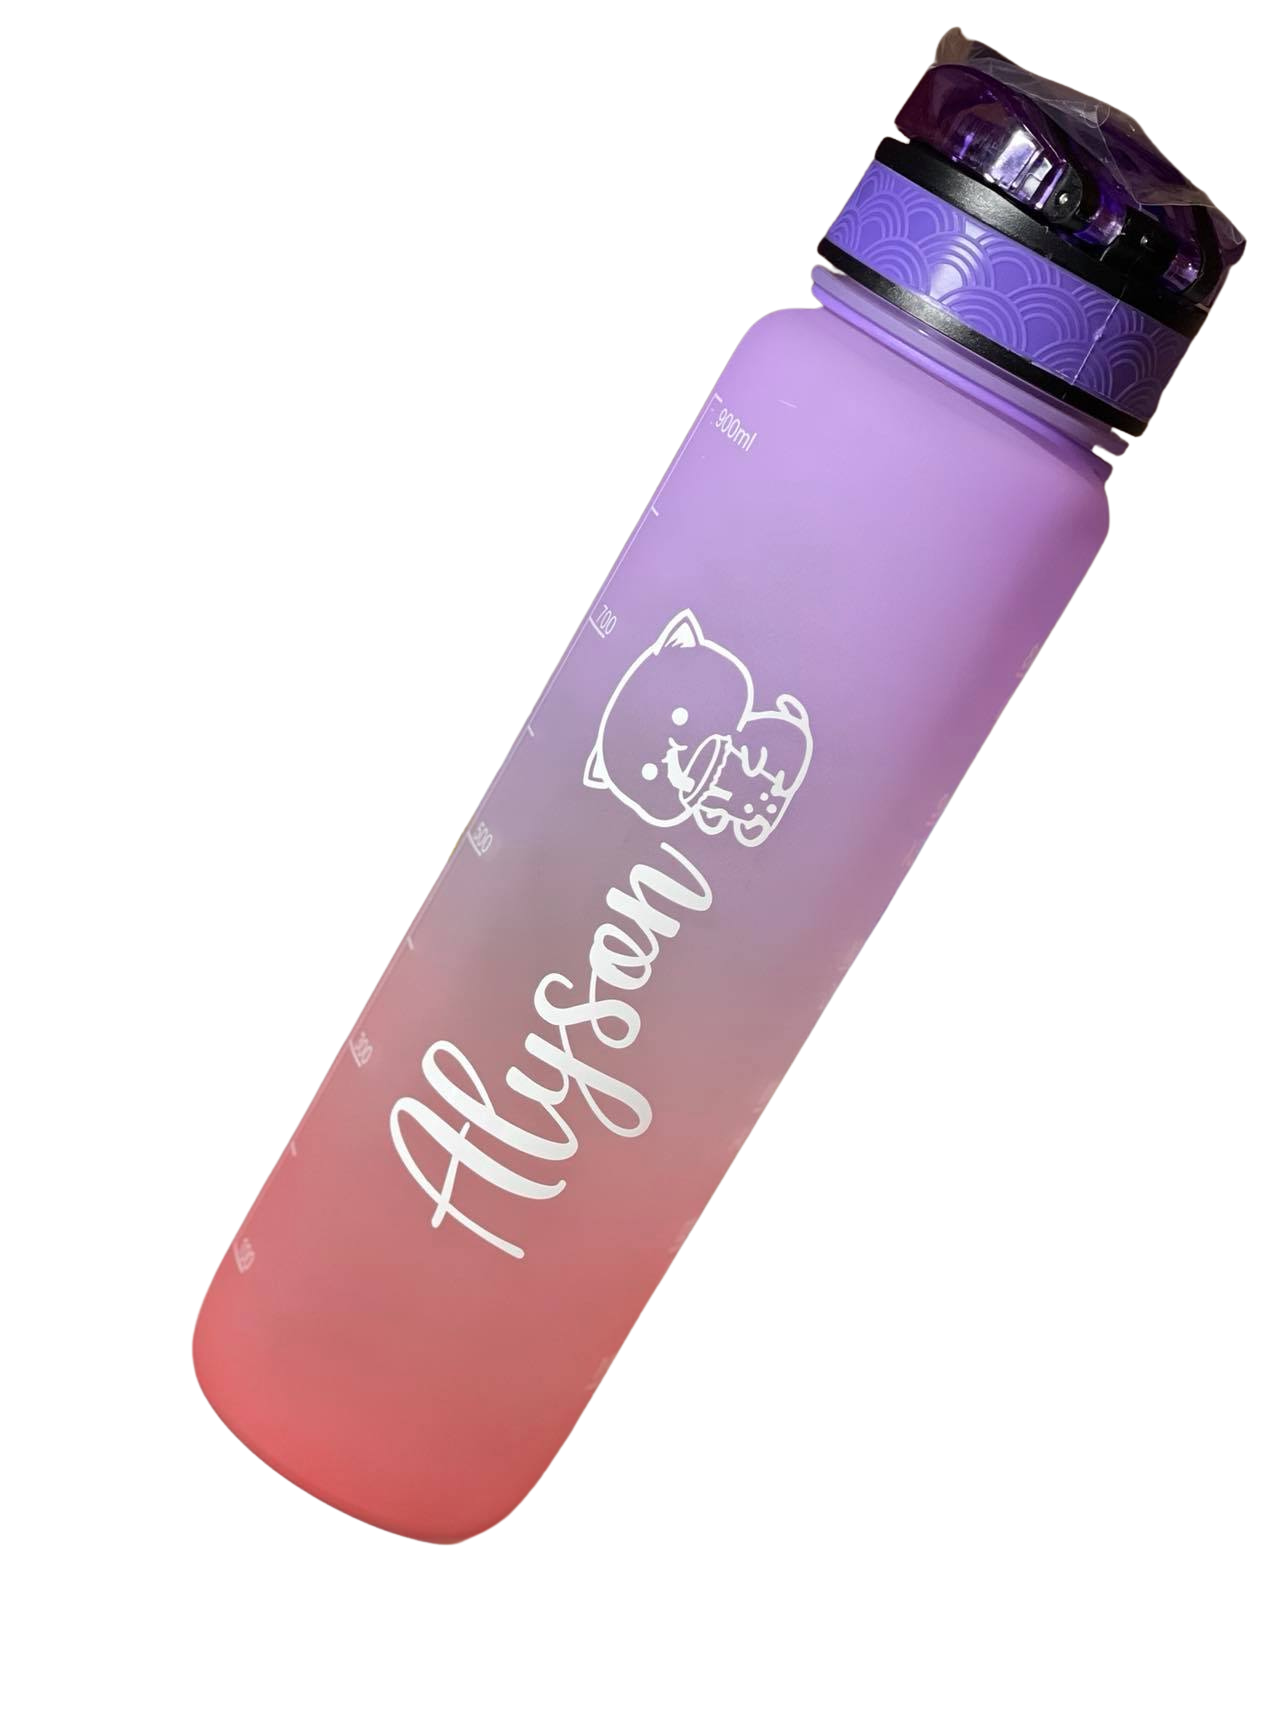 Aluminum Water Bottles $150, FREE delivery to most areas‼️, Available  Colours : Black, Orange, Purple, Pink You can customize these…